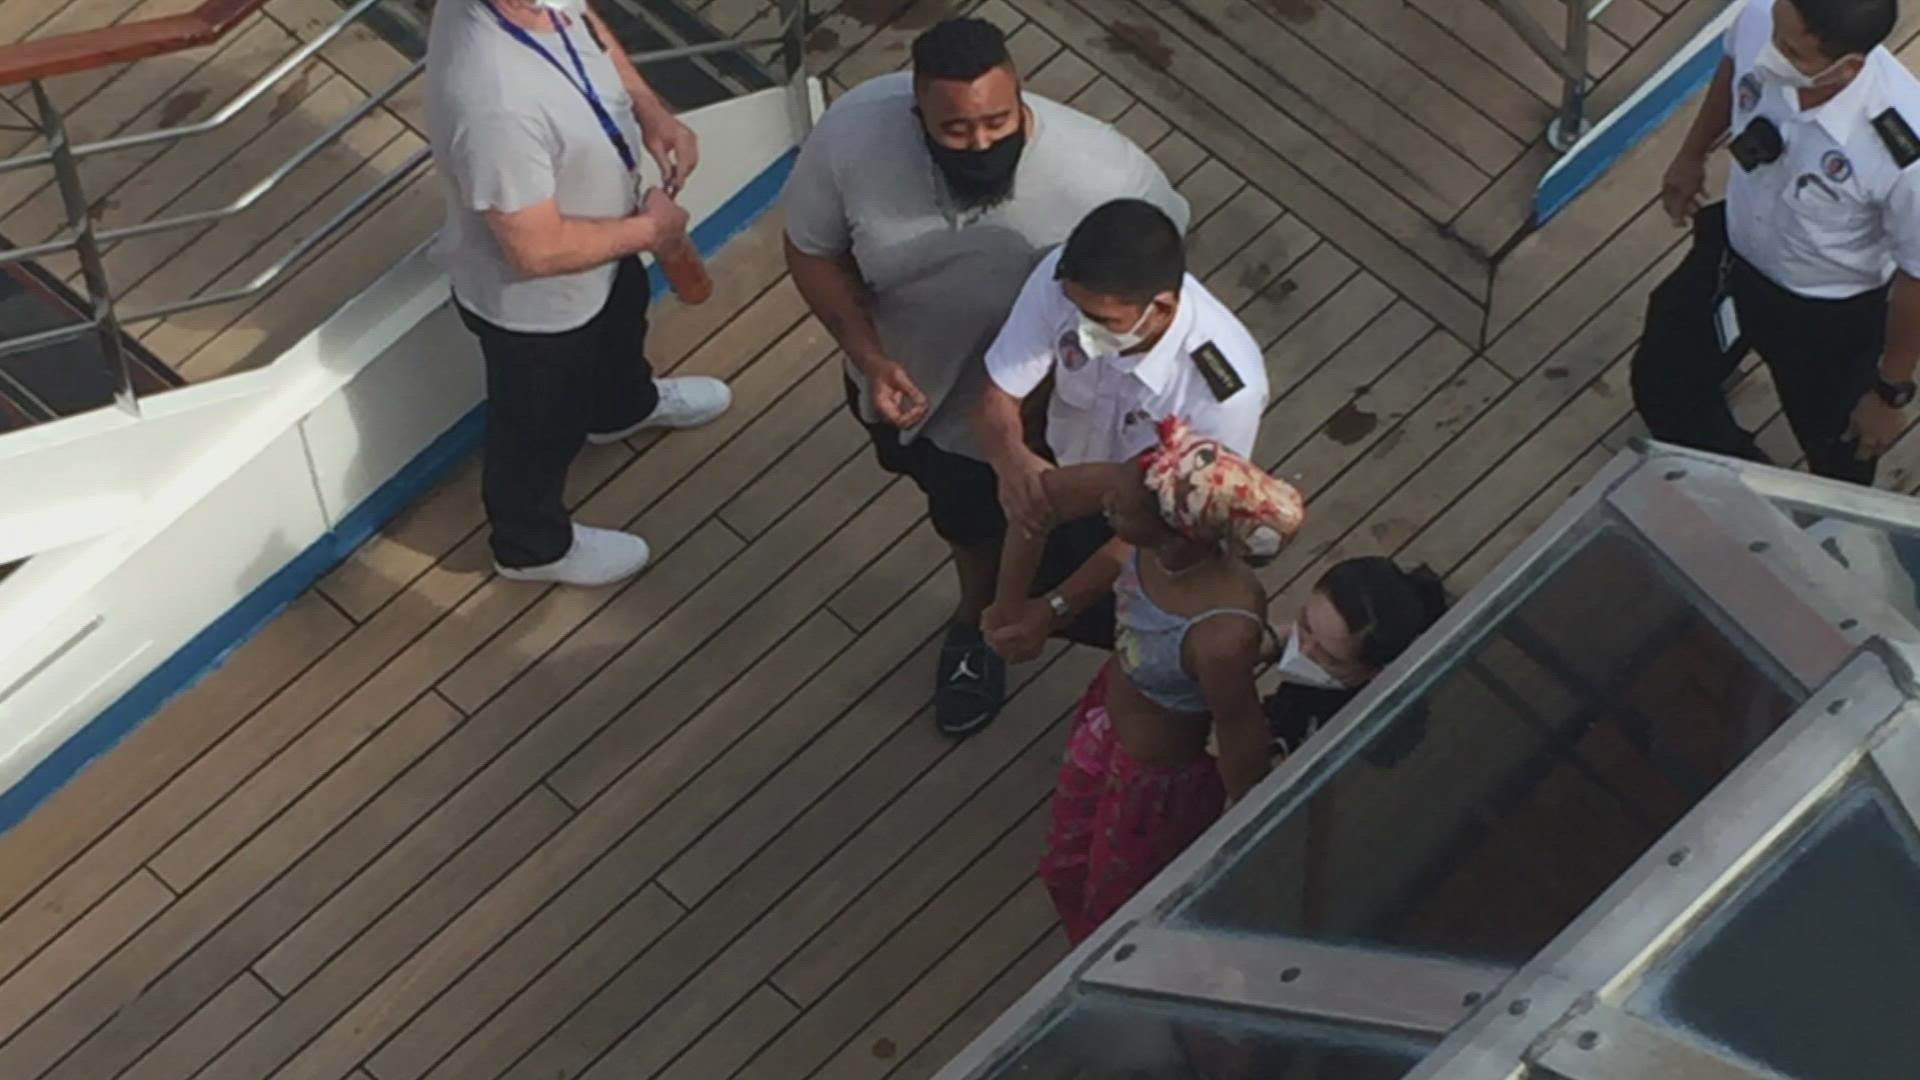 The Coast Guard has called off the search for the woman they said jumped off the Carnival Valor ship Wednesday after an incident with security.